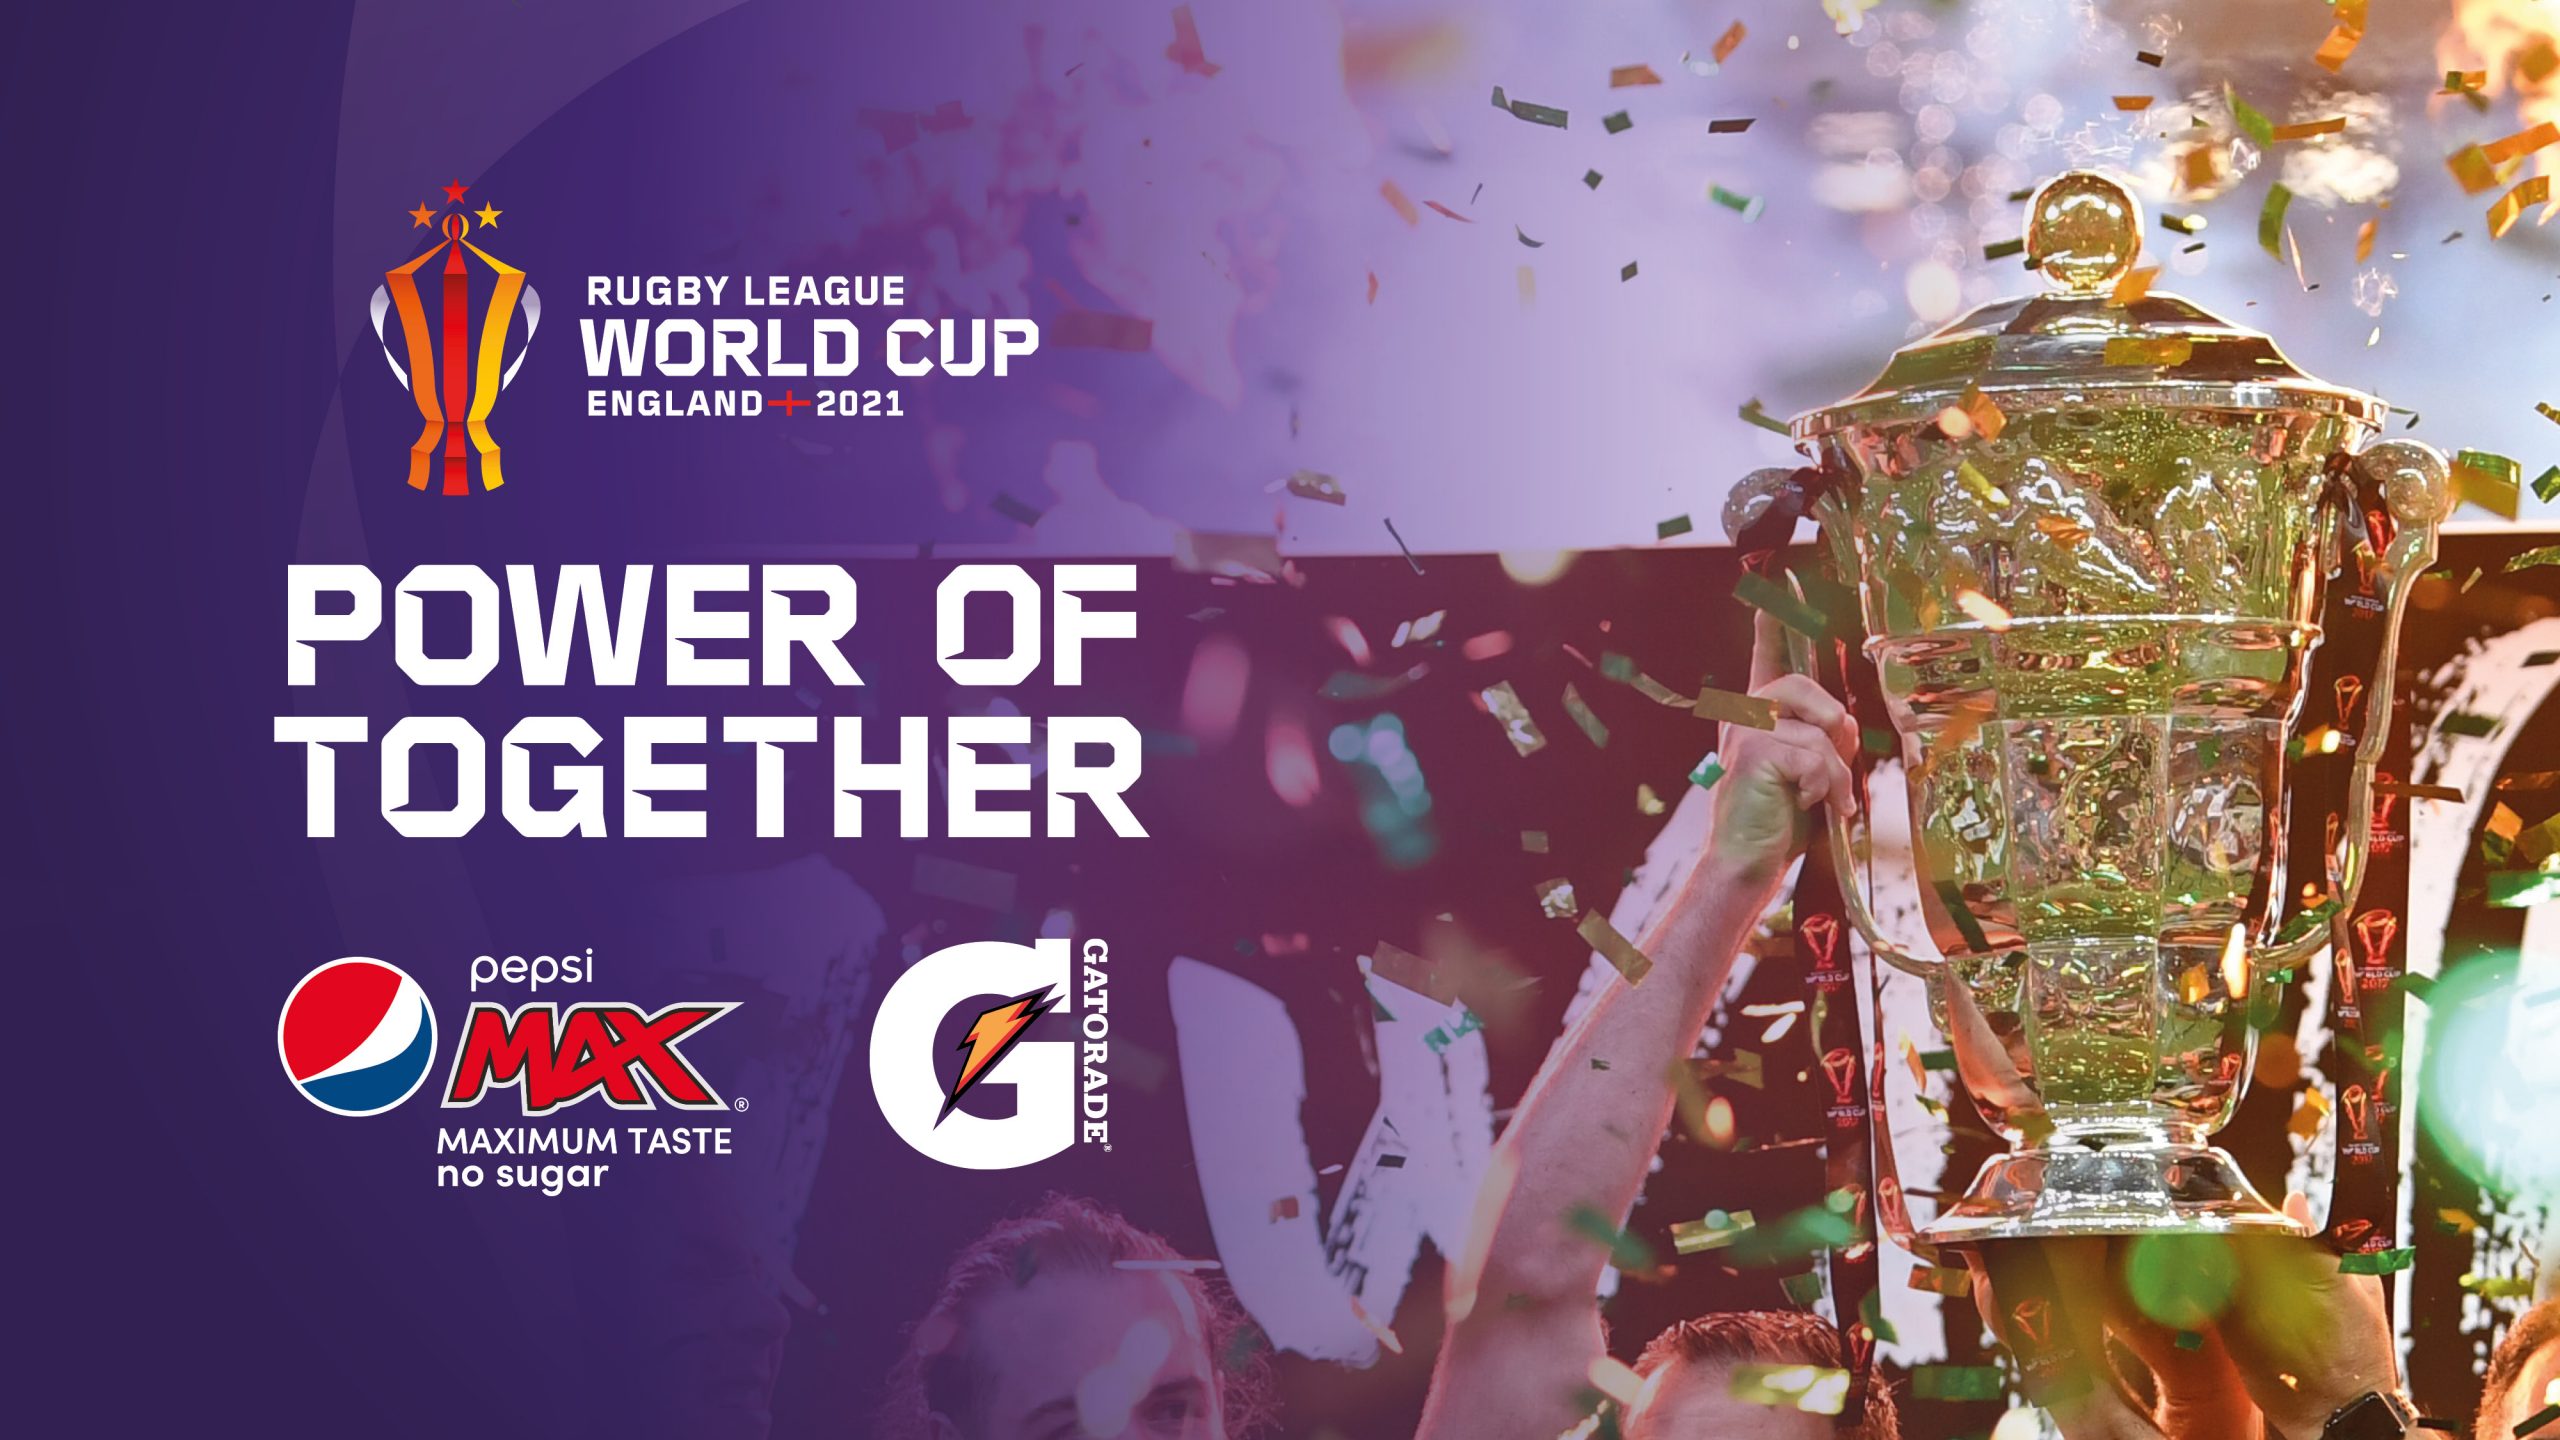 RLWC2021 announce sponsorships with Britvic Soft Drinks